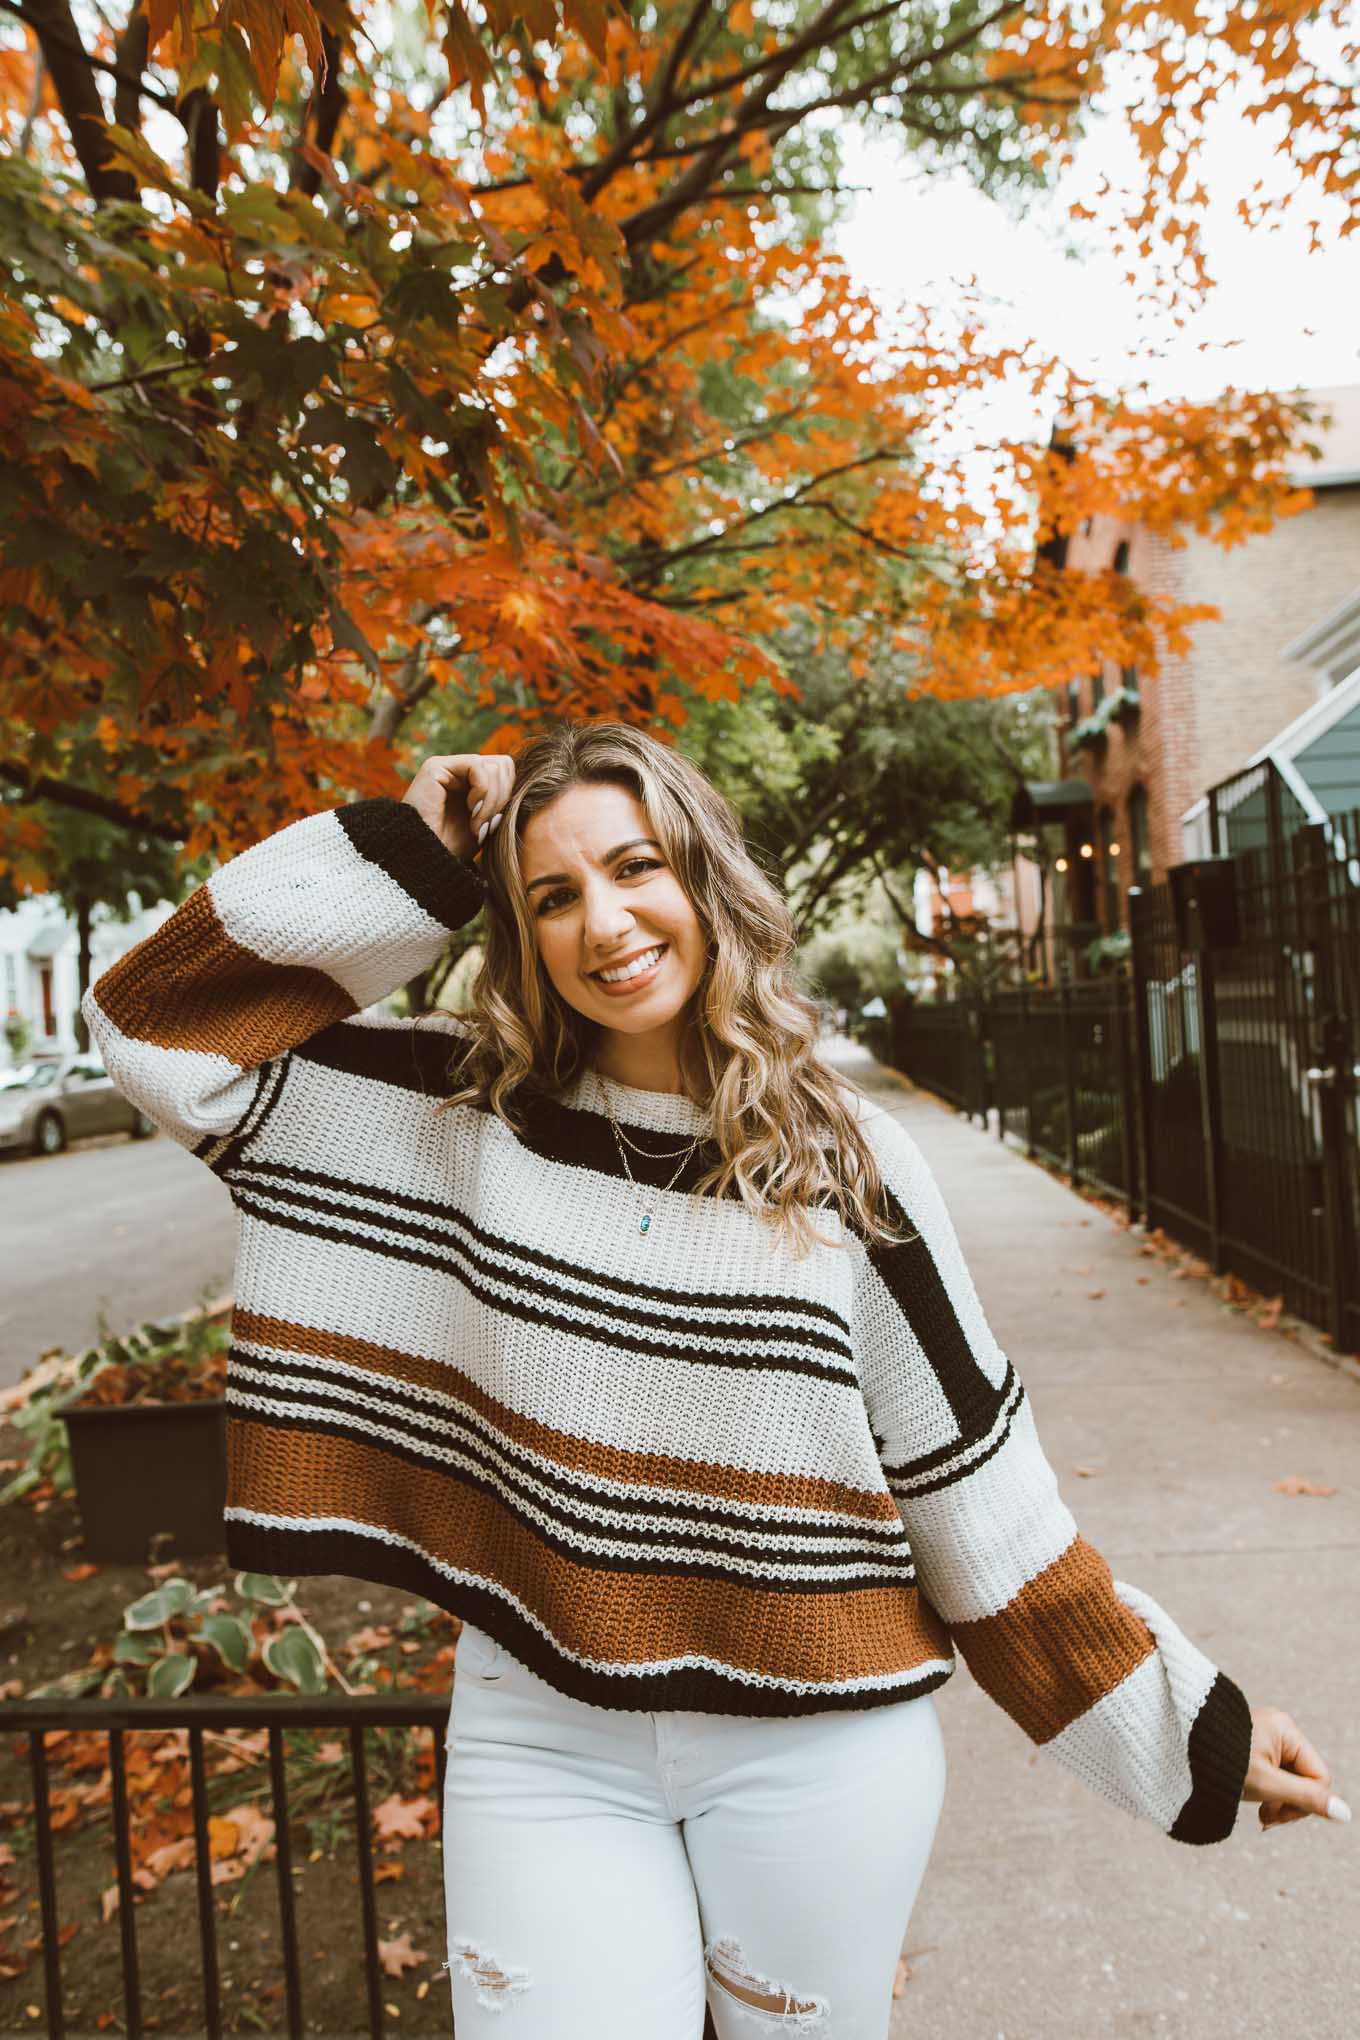 Fall Sweaters by popular Chicago fashion blog, Glass of Glam: image of a woman standing under a tree with orange leaves and wearing a Amazon ZESICA Women's Long Sleeve Crew Neck Striped Color Block Casual Loose Knitted Pullover Sweater, Old Navy Mid-Rise Distressed Rockstar Super Skinny White Ankle Jeans for Women, Gucci Gucci Jordaan GG canvas loafer, and Kendra Scott Elisa Gold Triple Strand Necklace In Abalone Shell.